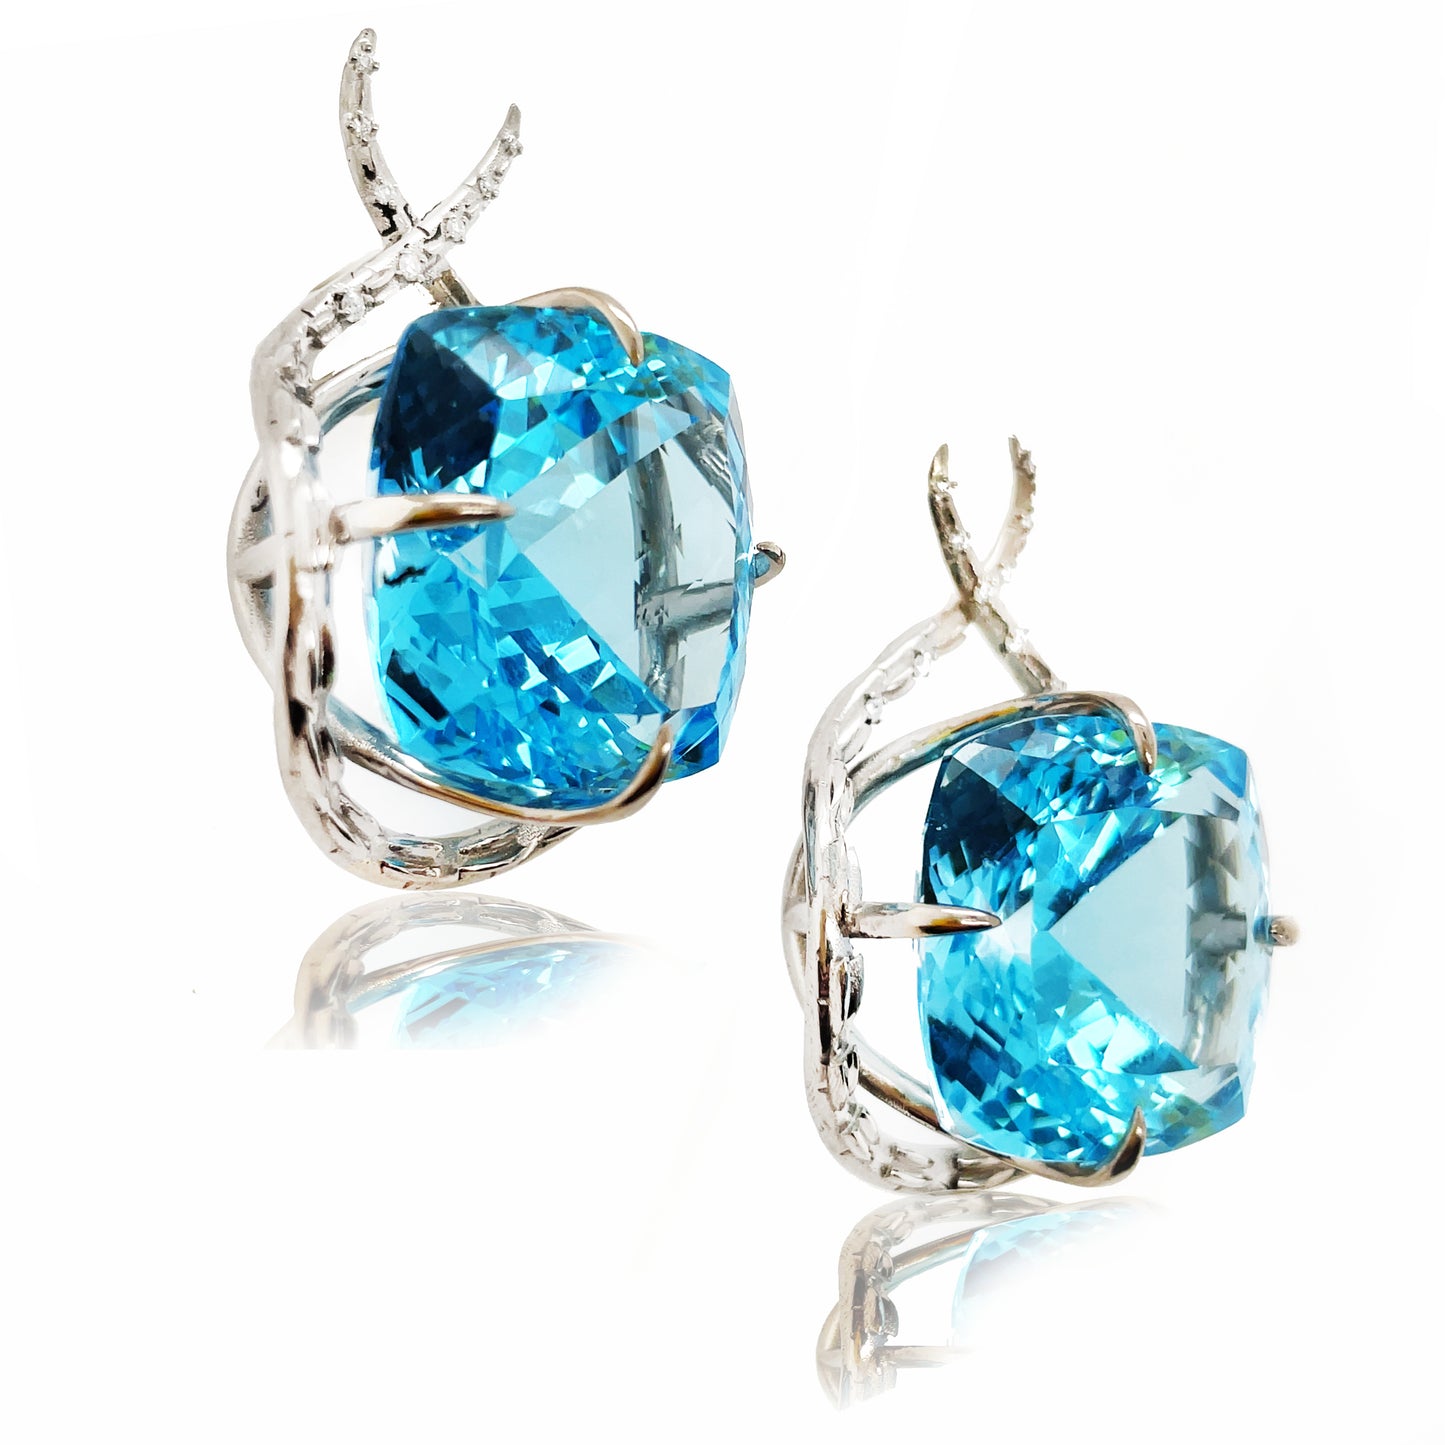 70ct Topaz and Diamond Croc Drop earrings in 18ct white gold